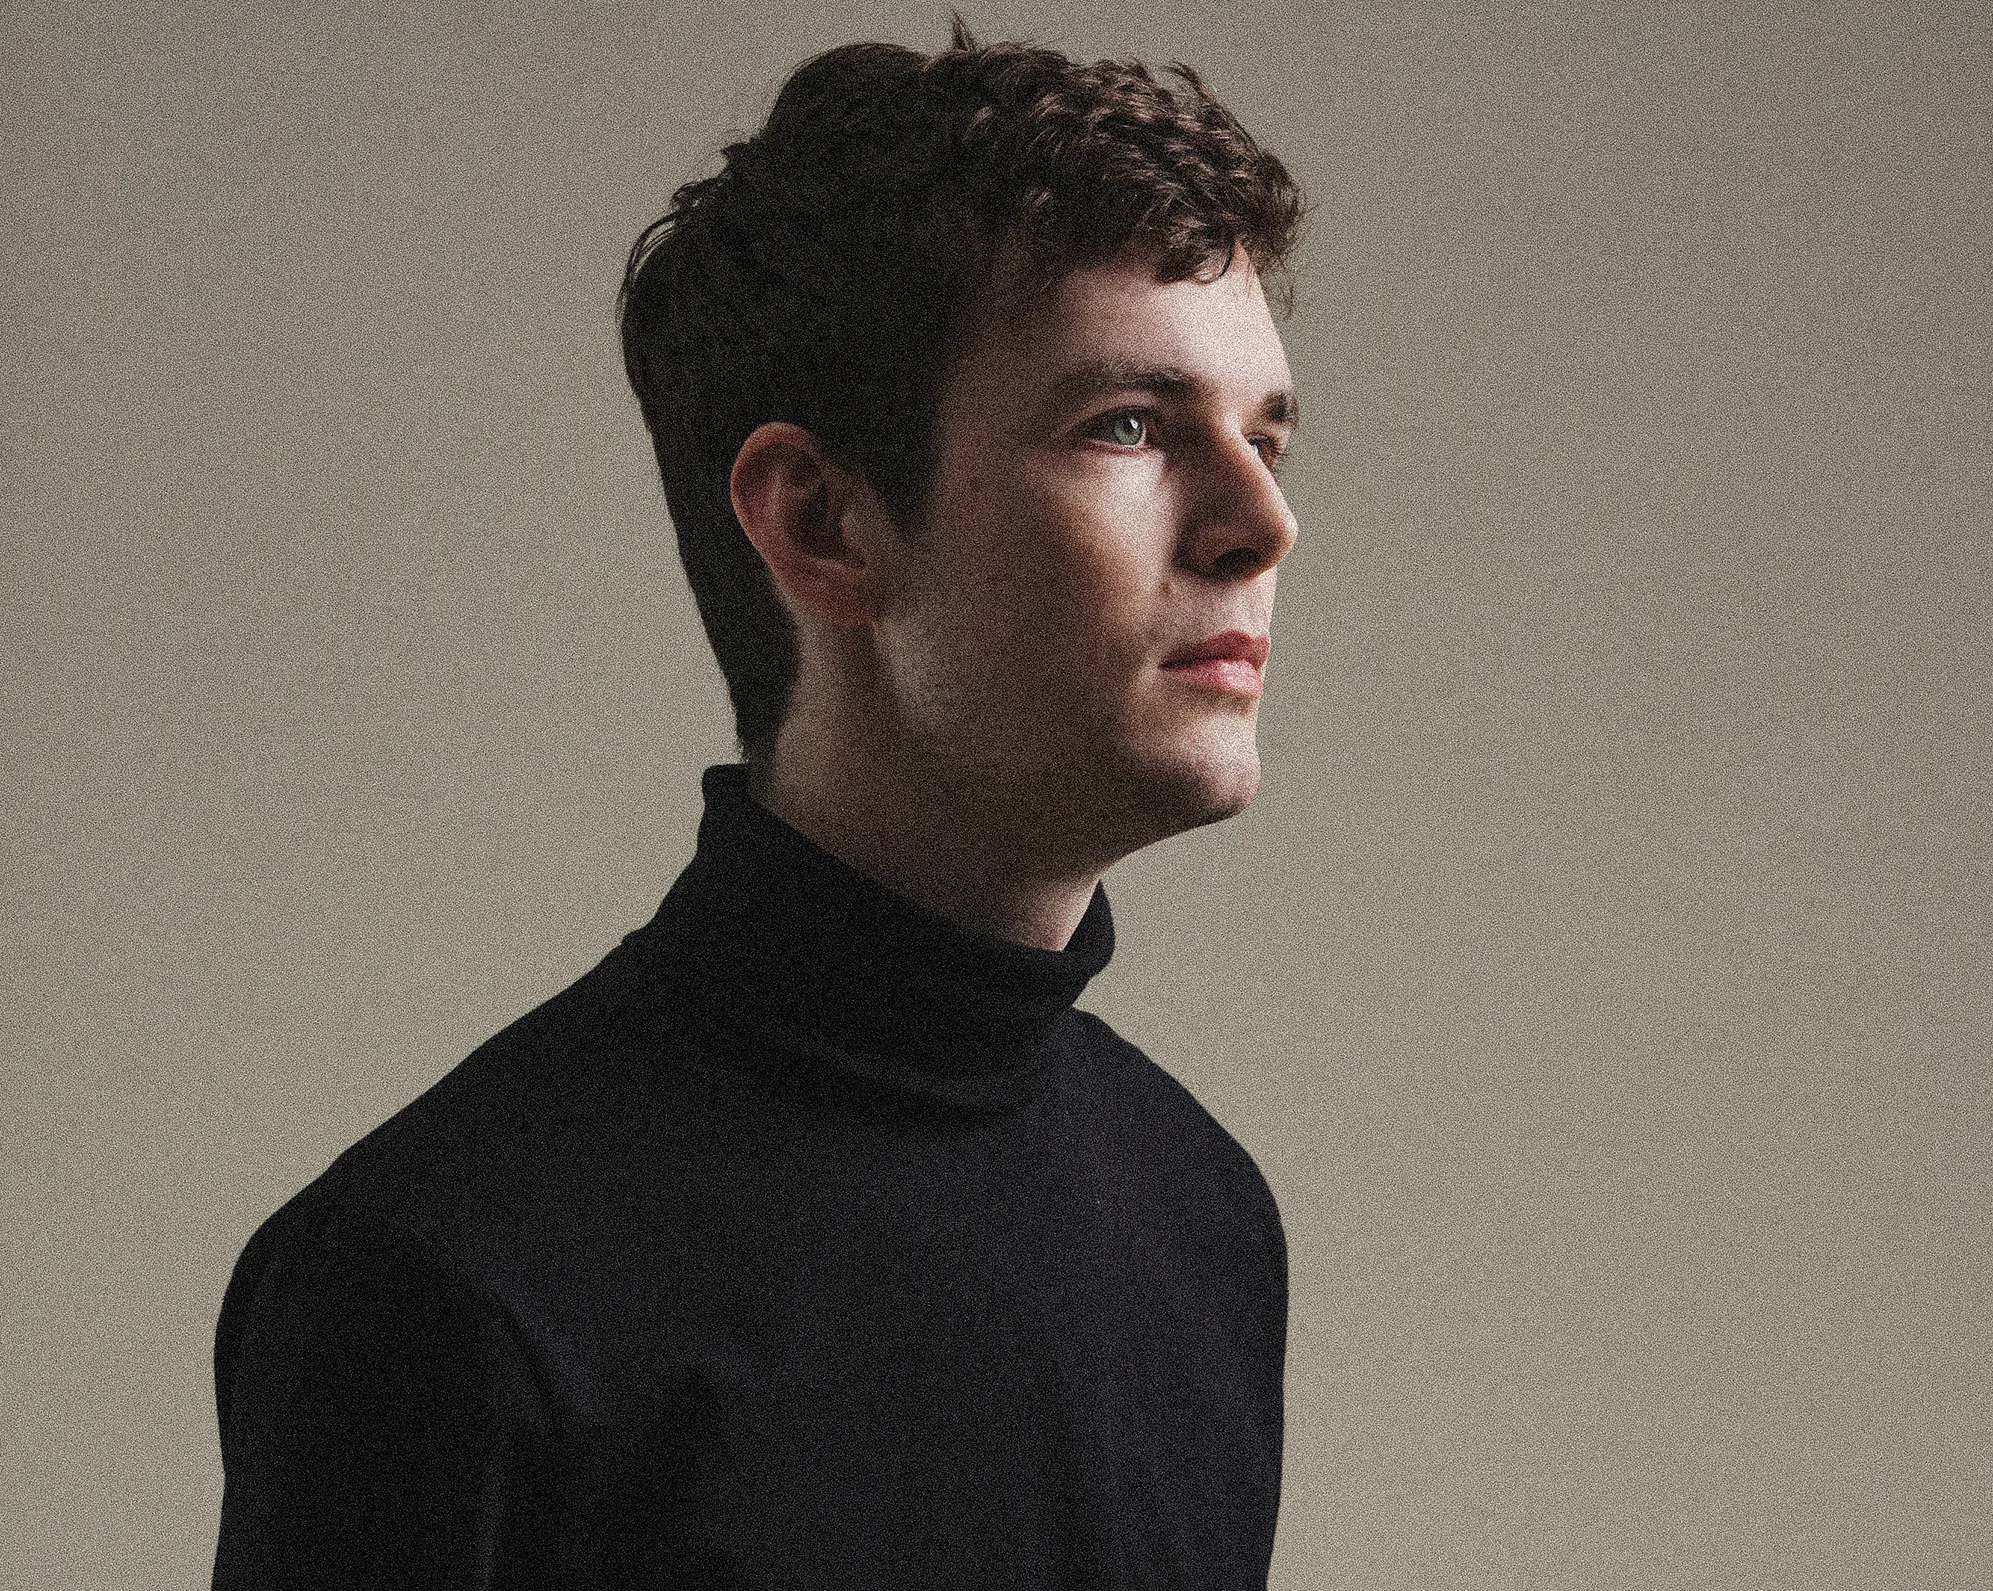 TRACK PREMIERE: Cathal Murphy releases new single ‘Blue In The Best Way’ – Listen Now!